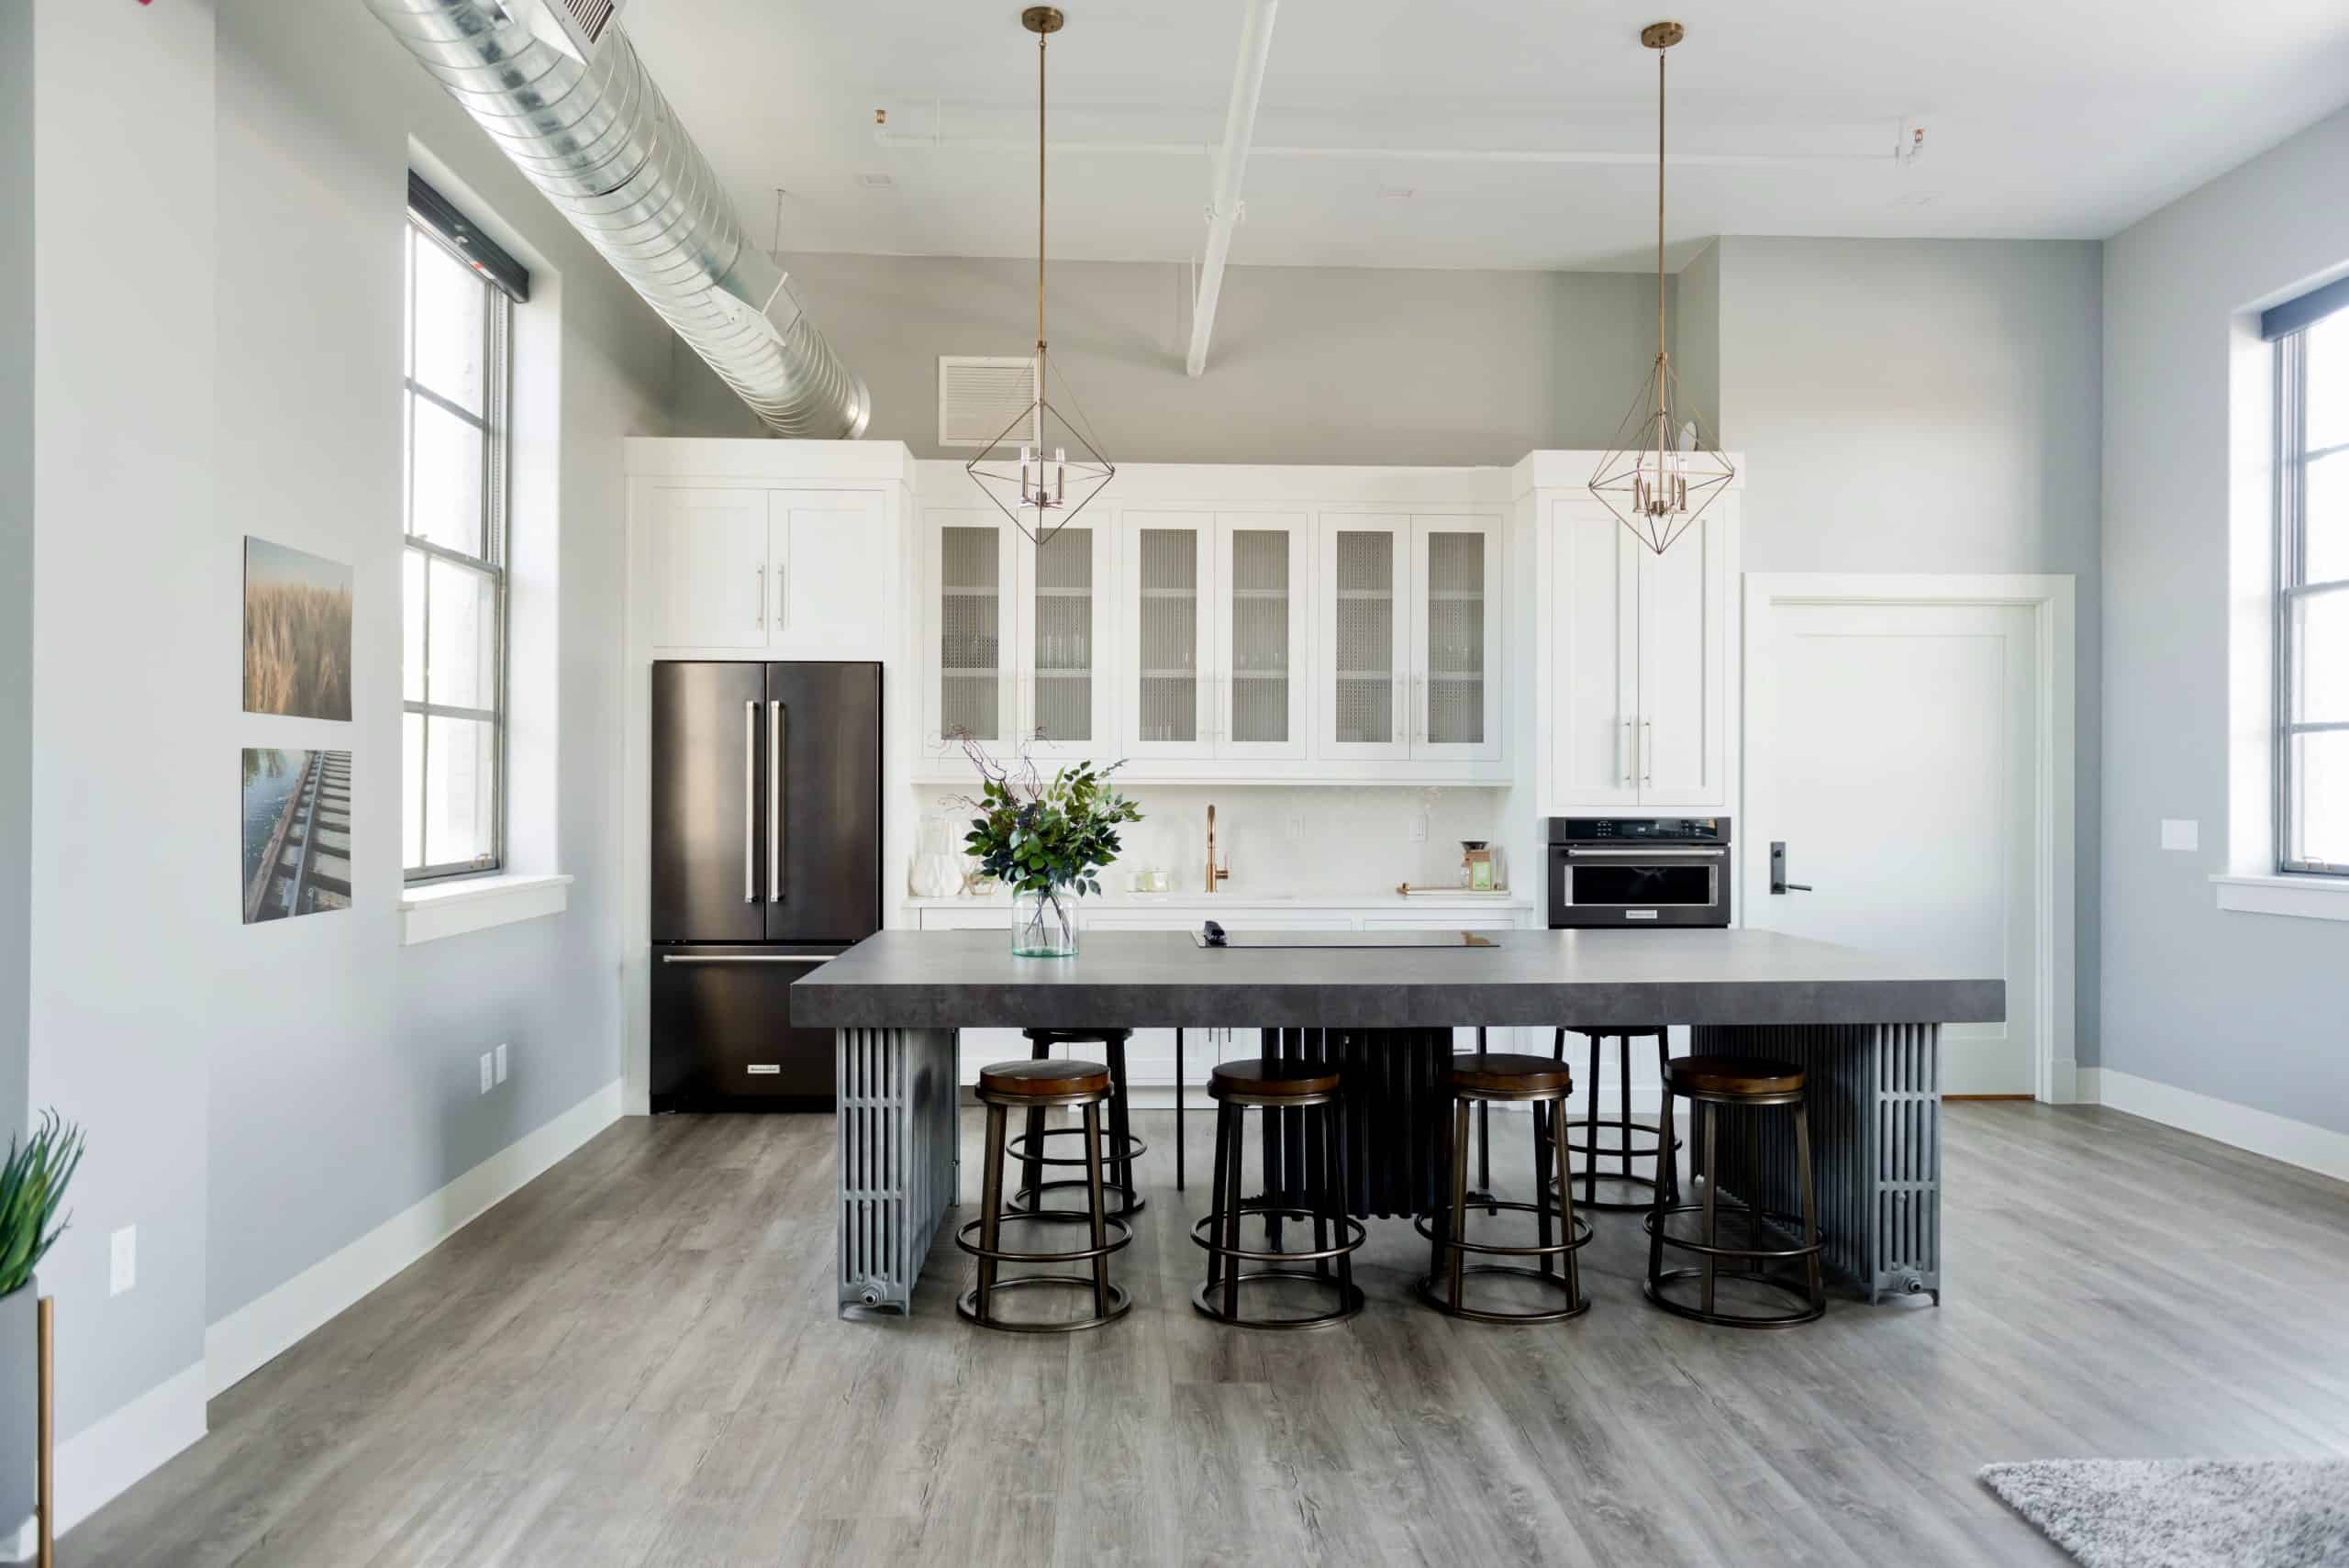 Gray Floors Add A Sophisticated Touch